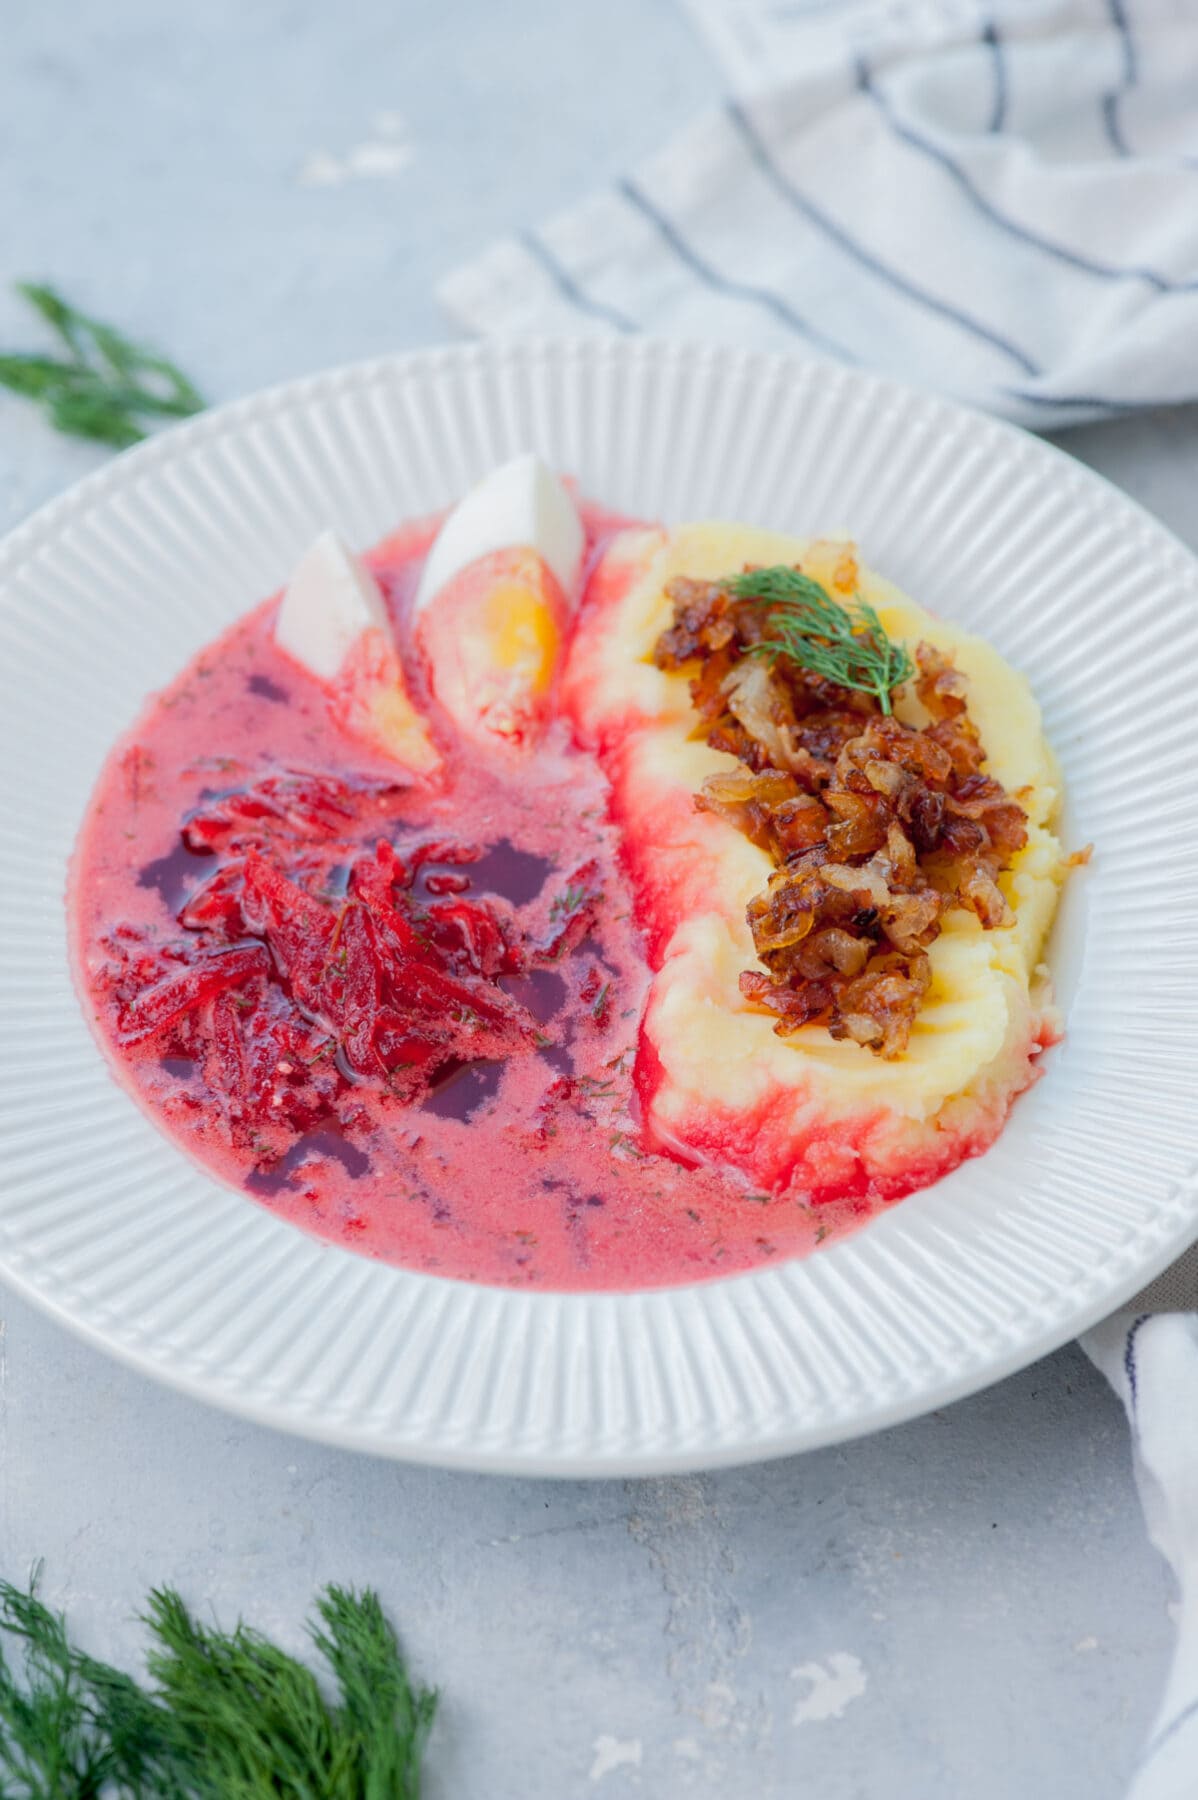 Barszcz soup in a white plate with mashed potatoed and onion bacon topping.